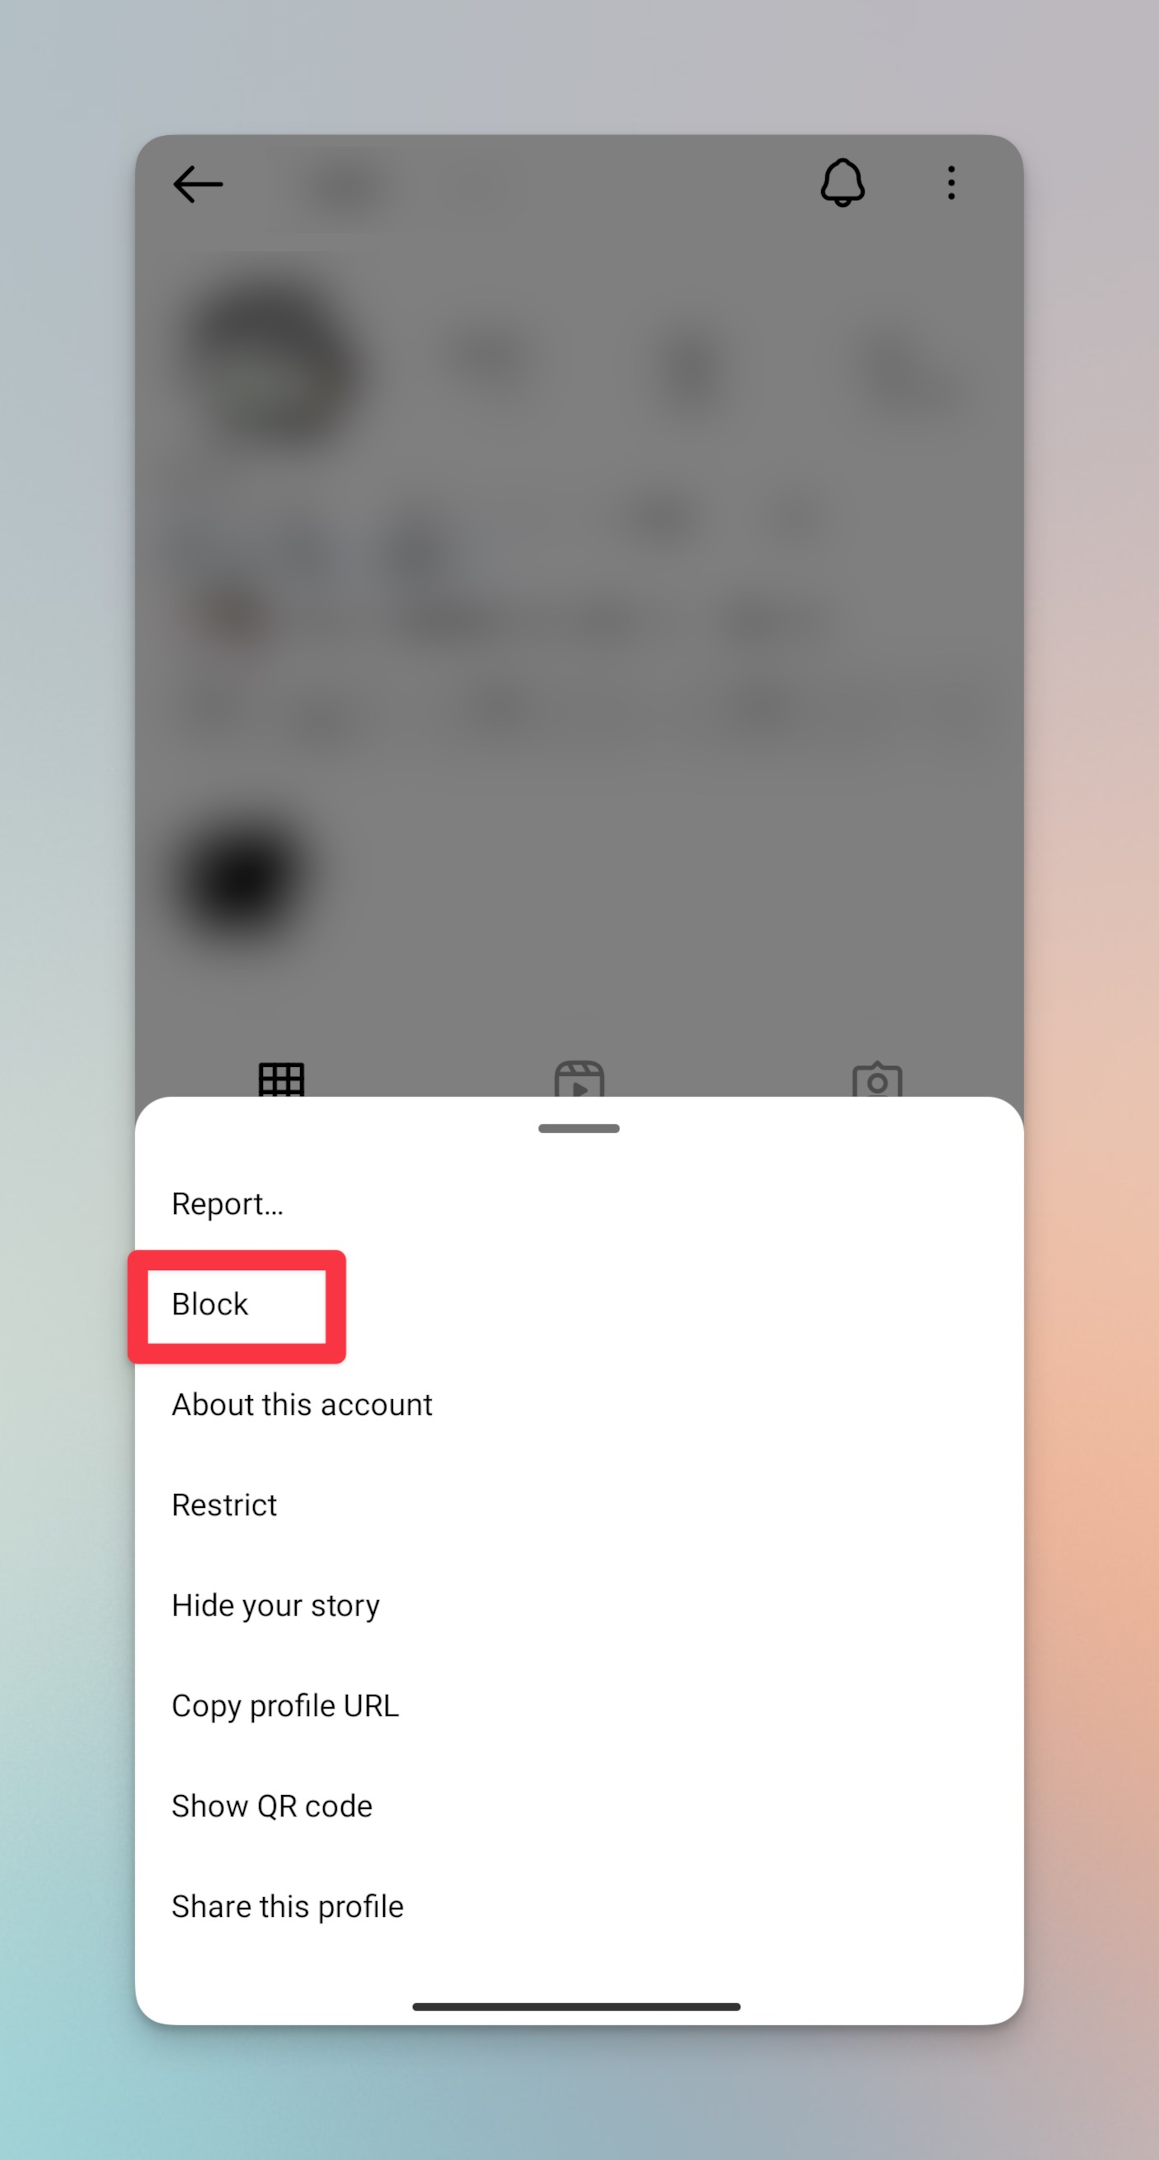 Remote.tools shows to tap on Block option to switch to private mode on Instagram